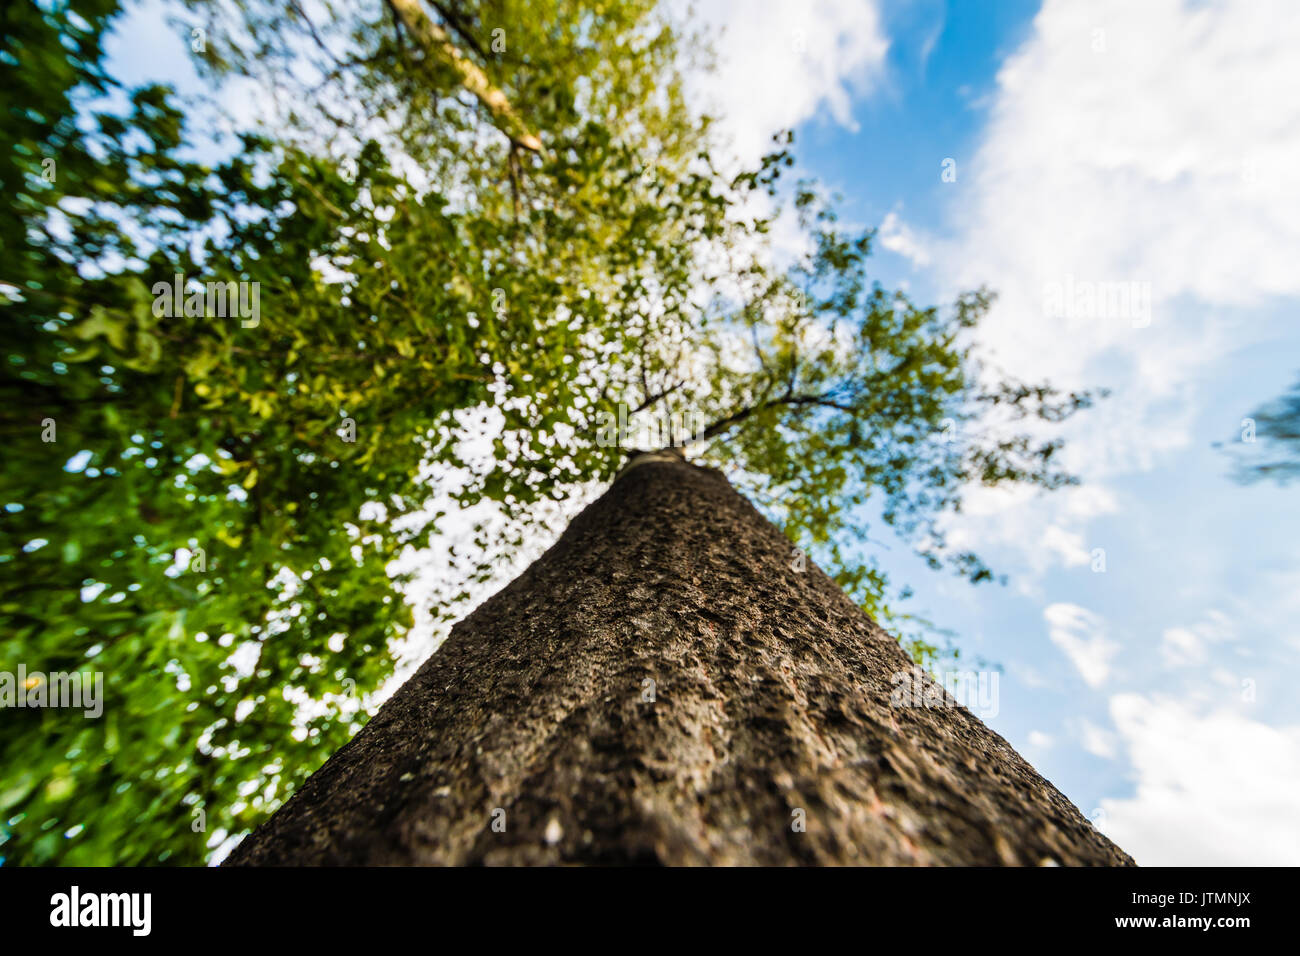 Low angle view of tree, from bottom to top. Beautiful blue sky with clouds on background. Nice pattern, nice structure. Stock Photo